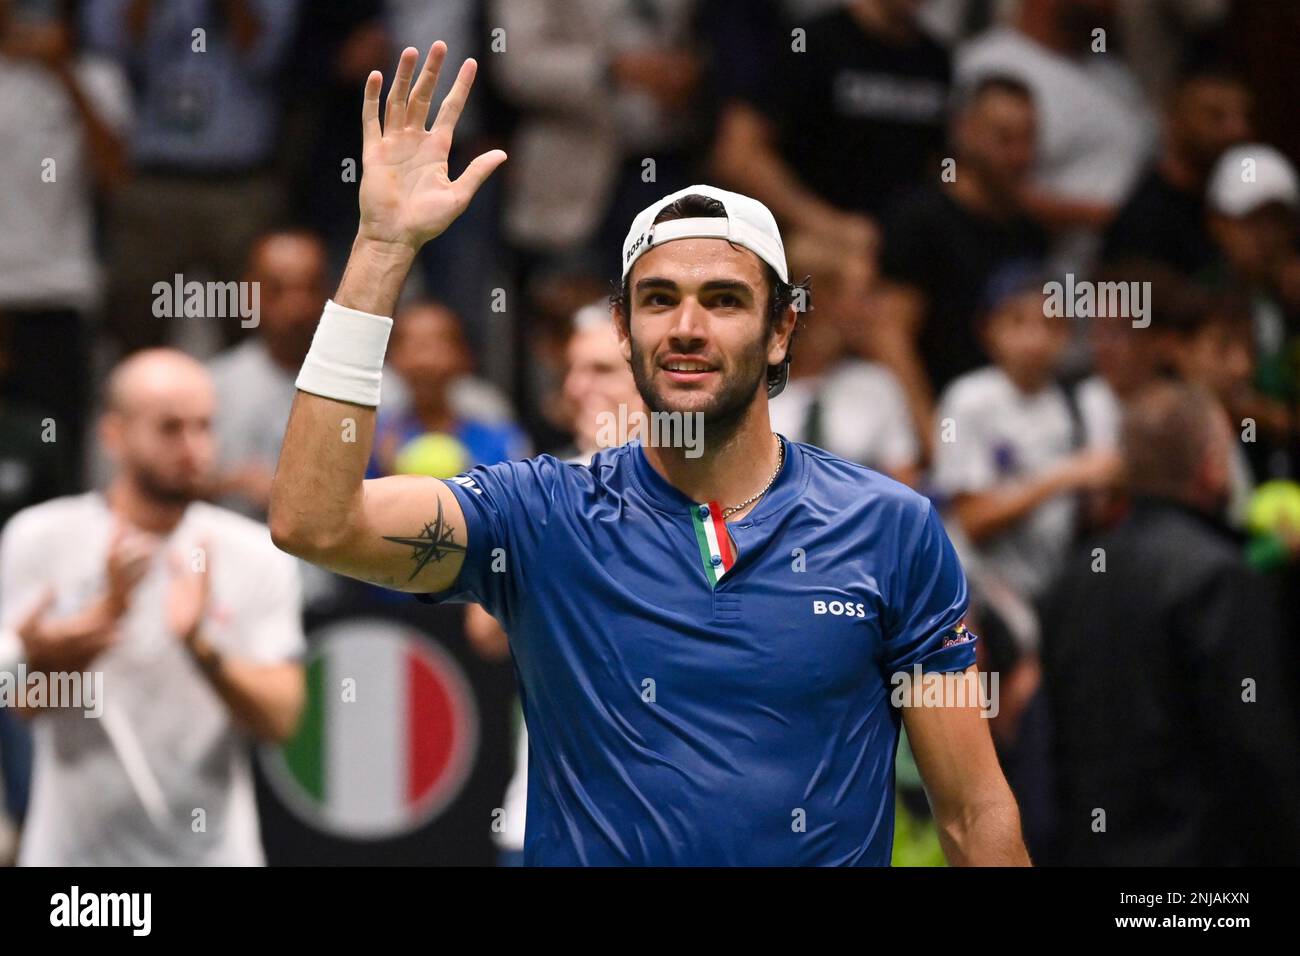 Italys Matteo Berrettini celebrates after beating Argentinas Sebastian Baez during their Davis Cup tennis match in Bologna, Italy, Friday, Sept